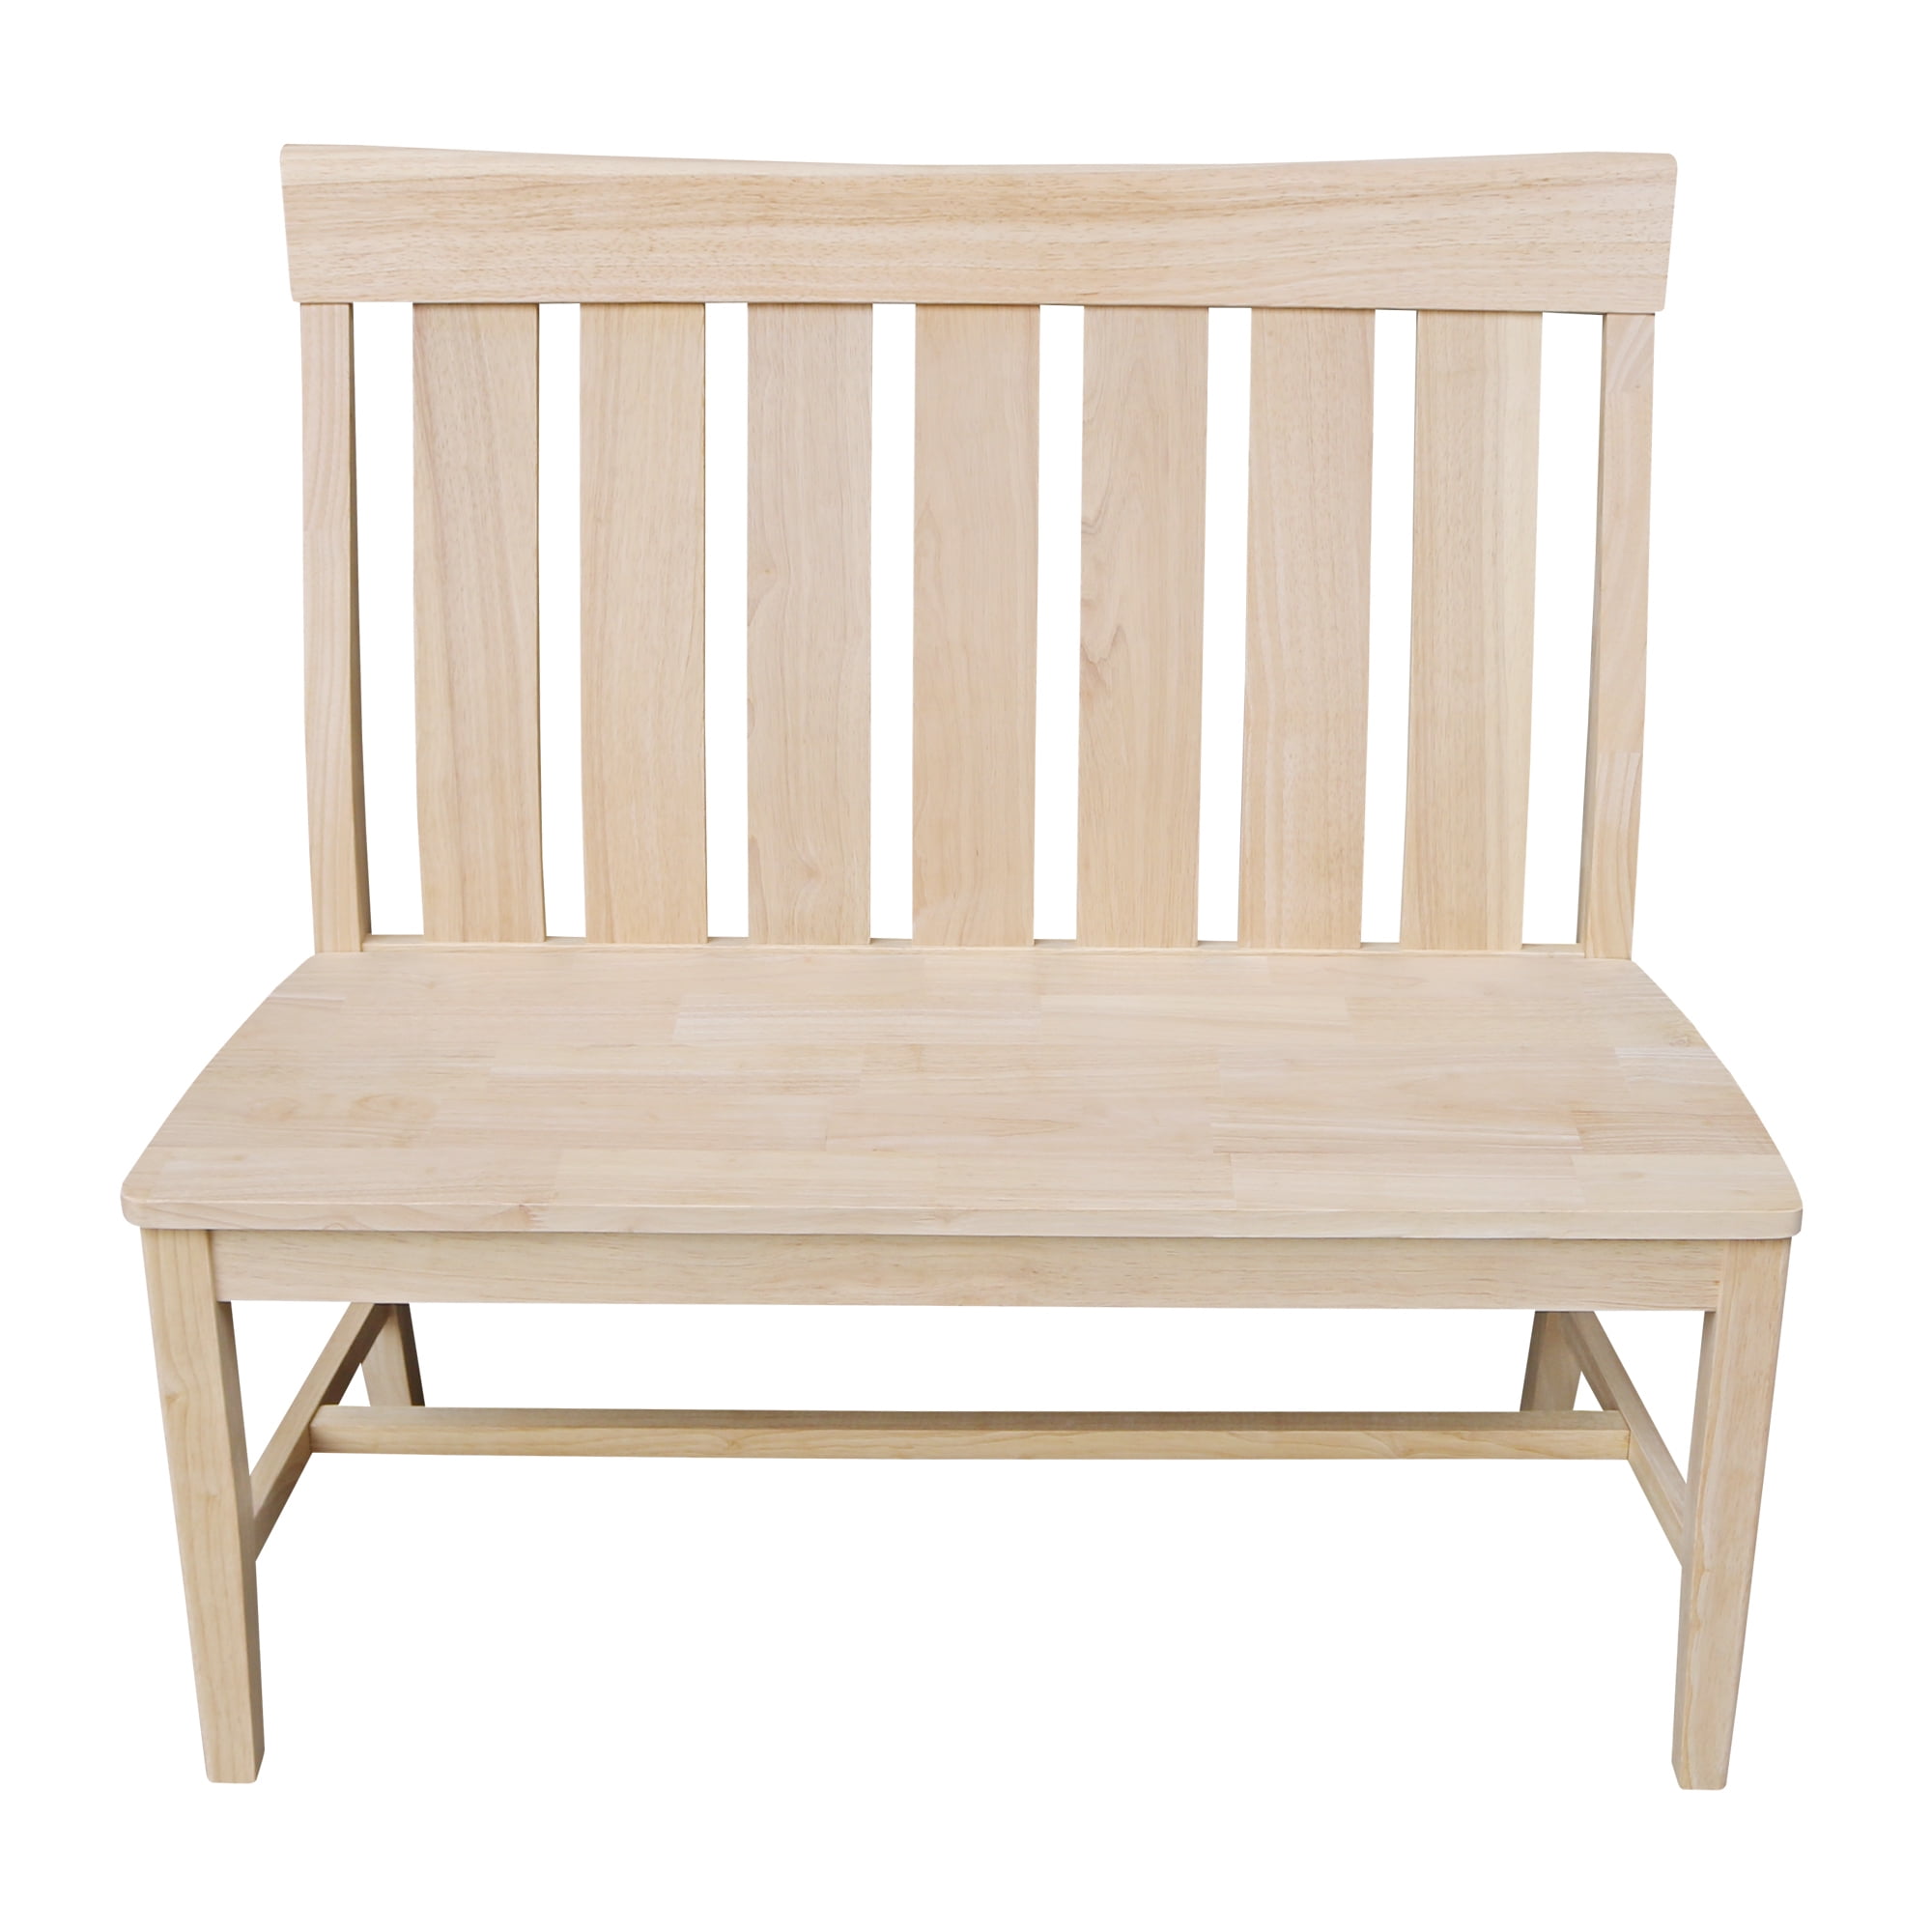 International Concepts Be-47s Shaker Style Bench Unfinished for sale online 